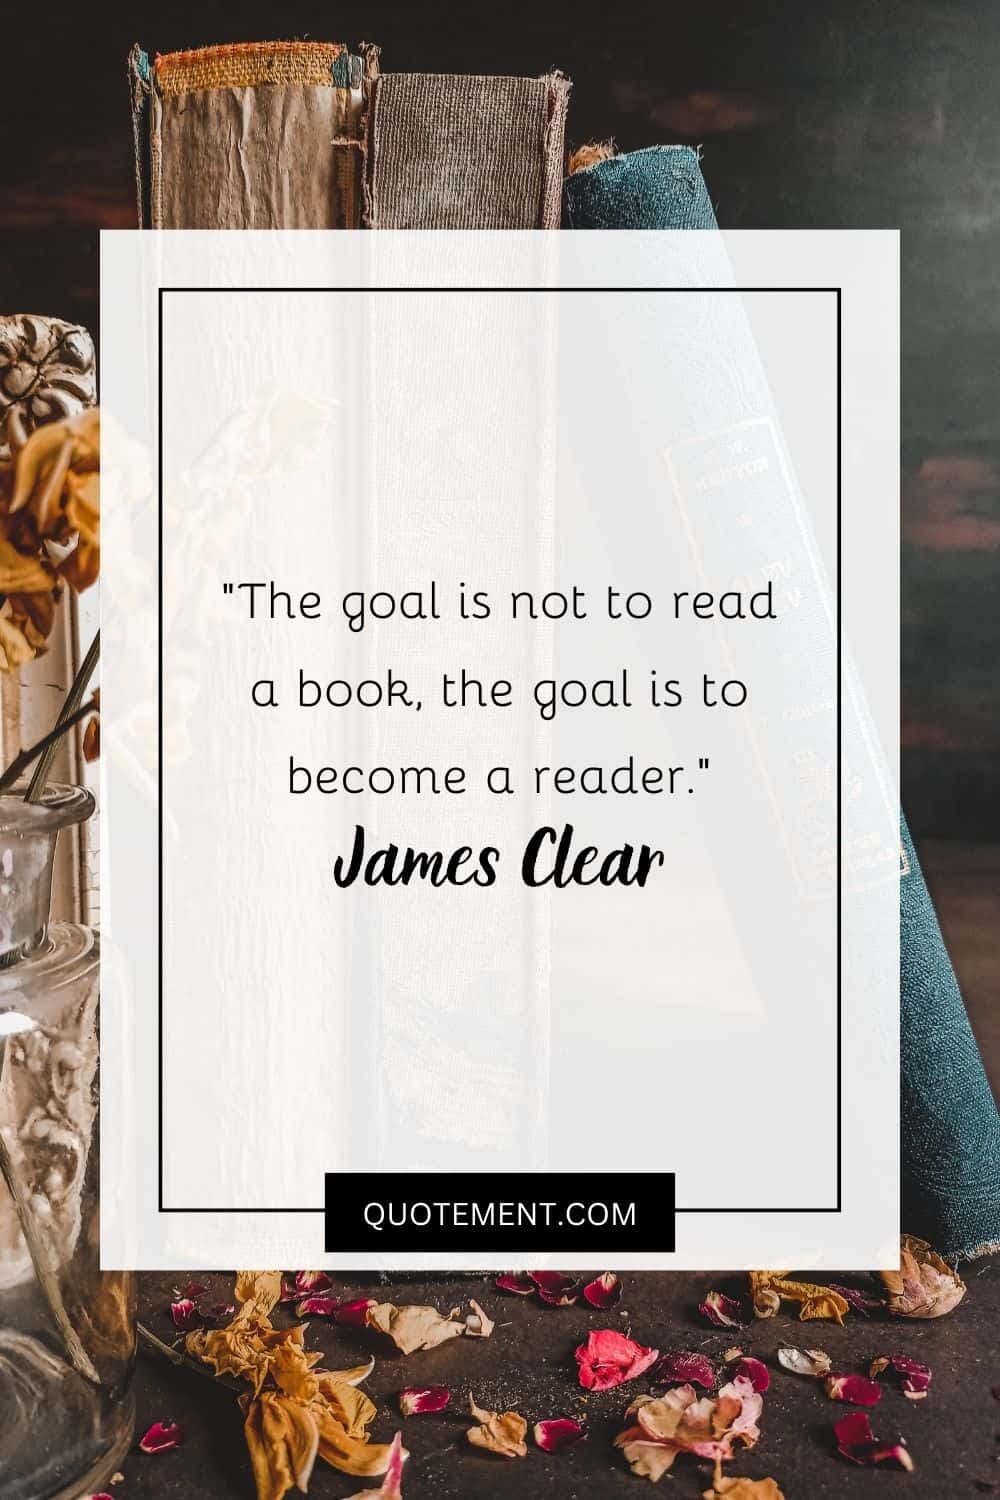 The goal is not to read a book, the goal is to become a reader